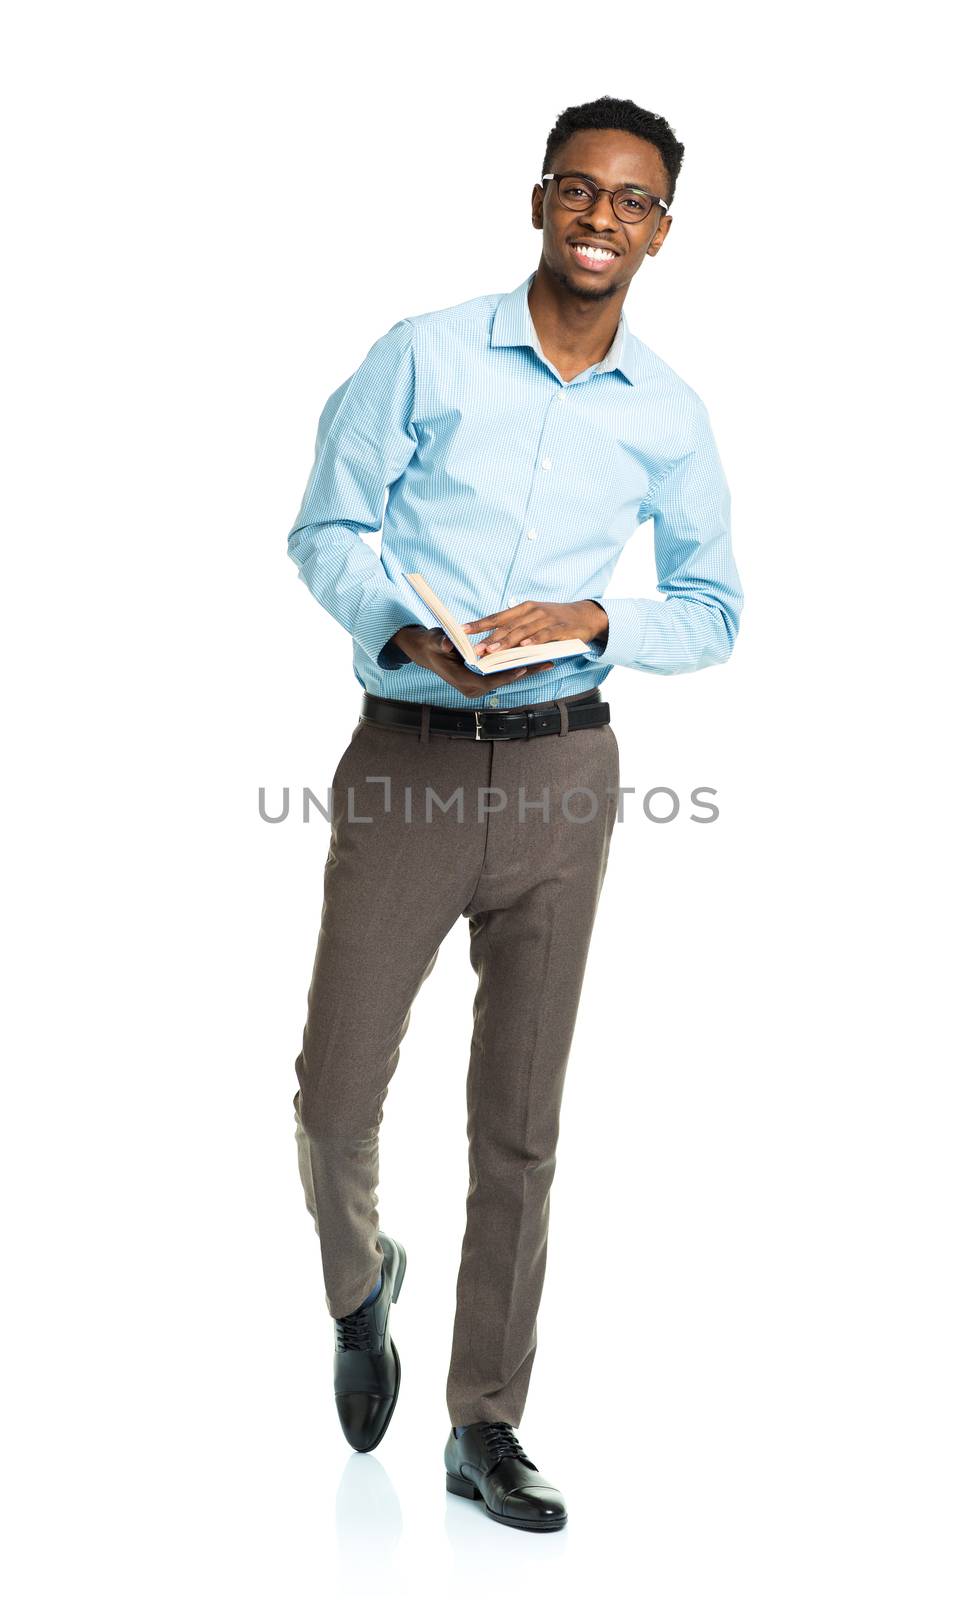 Happy african american college student with book in his hands standing on white background